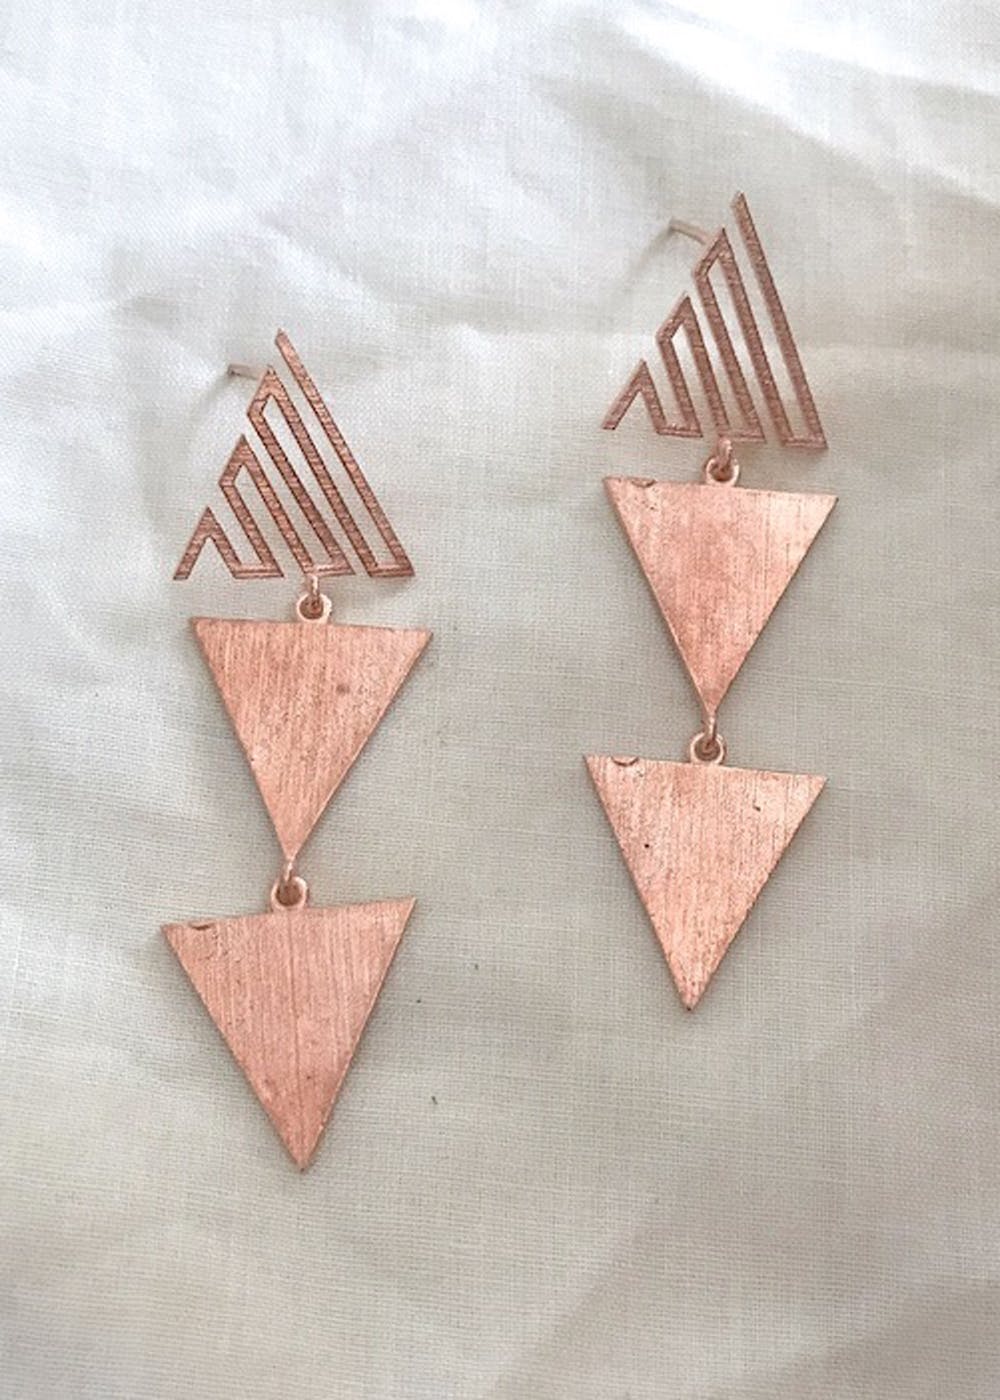 Top more than 264 gold triangle earrings super hot